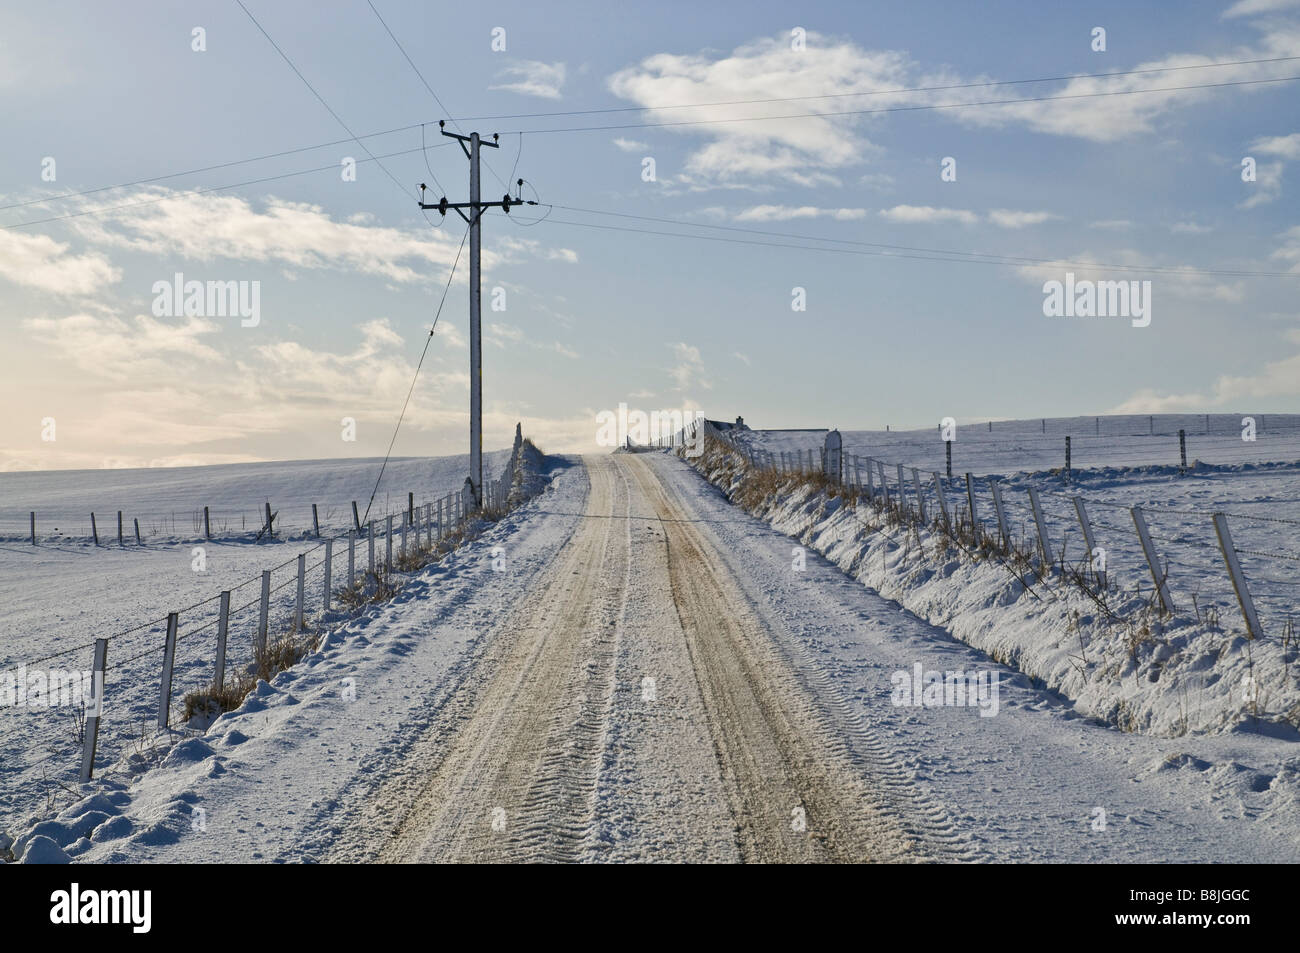 dh  ROADS UK Icy snowy open empty road snow fields hydro electric electricity poles Orkney wintertime winter scotland Stock Photo